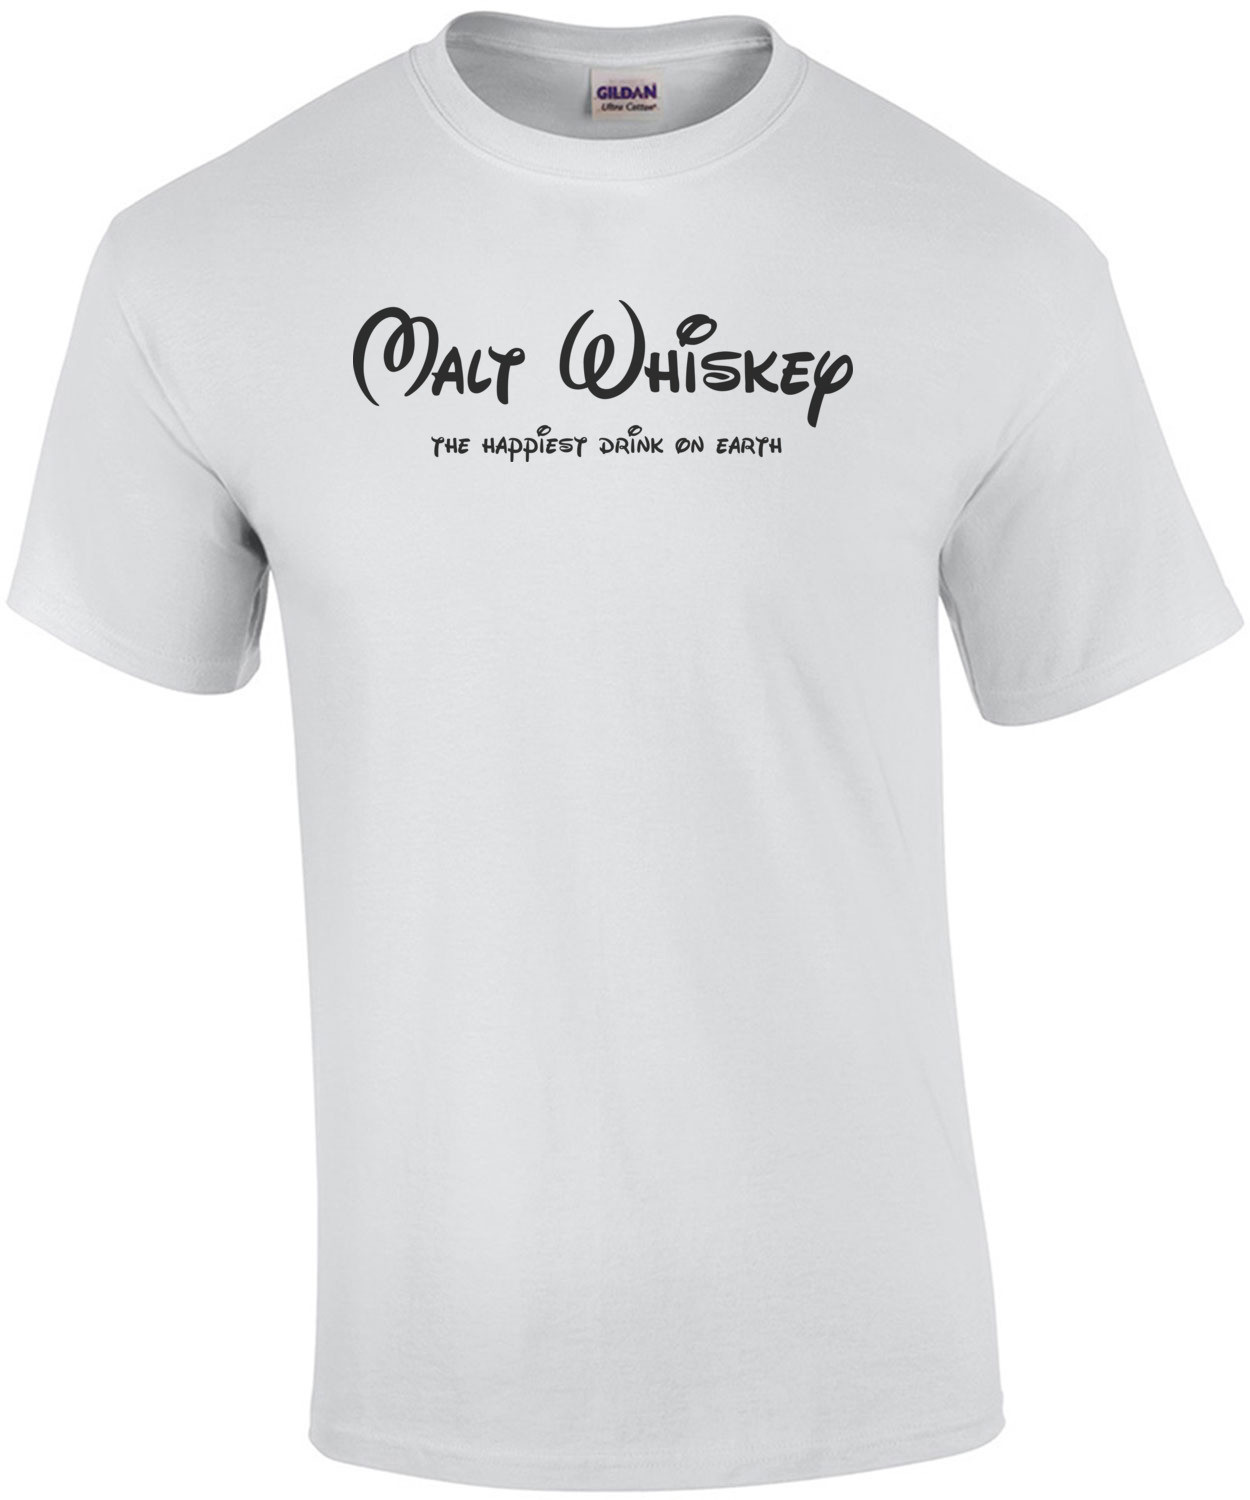 Malt Whiskey - The Happiest Drink On Earth Shirt